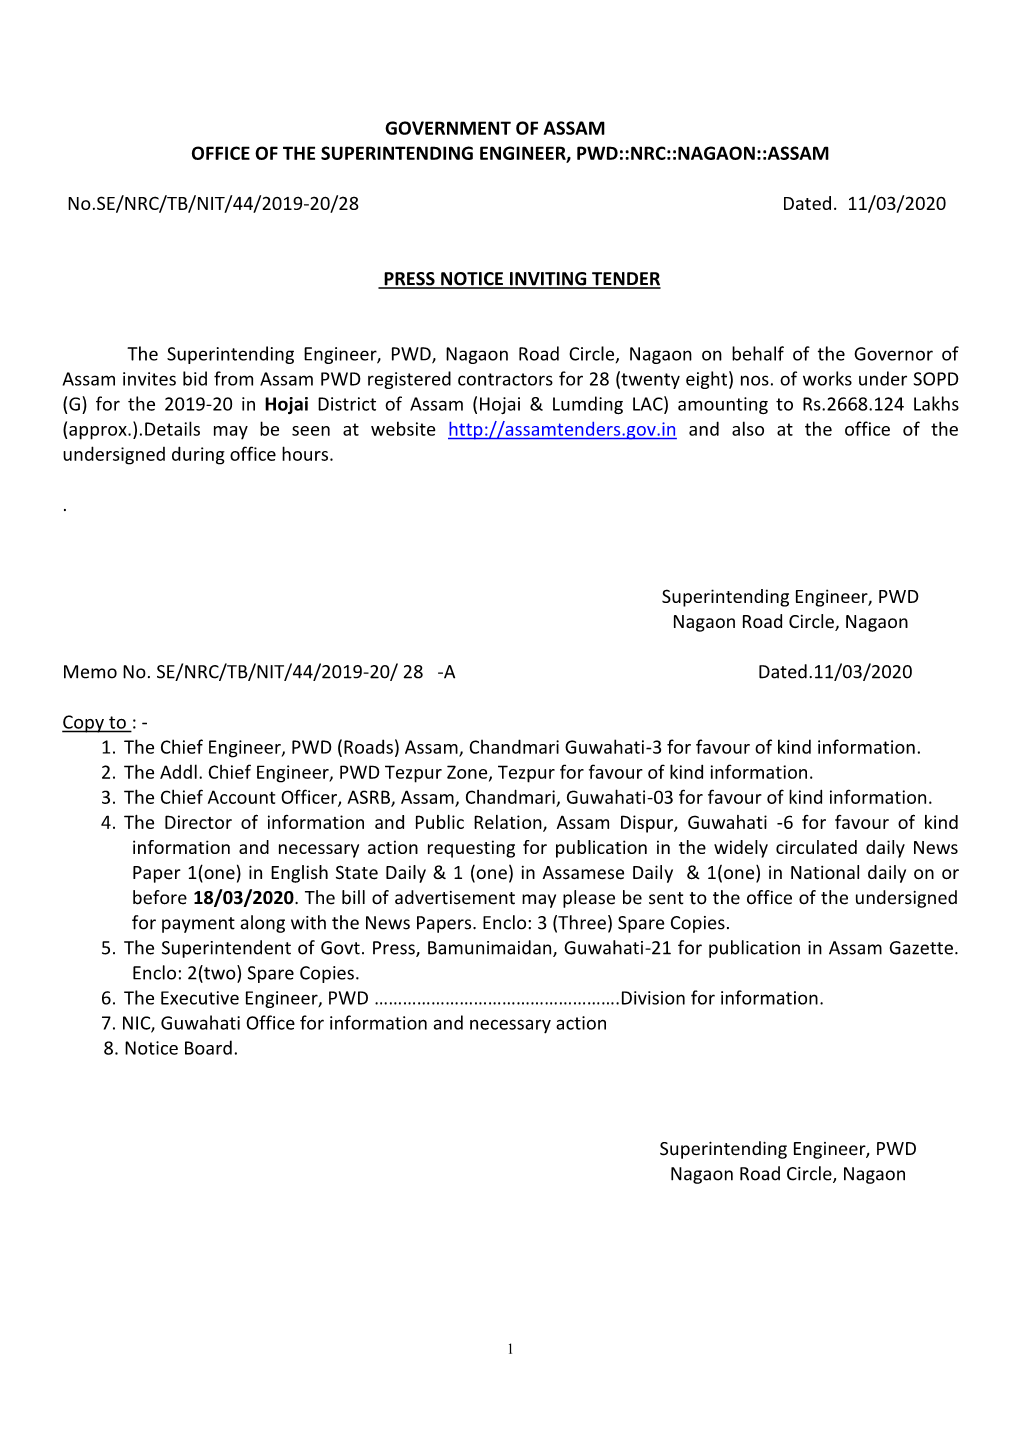 Government of Assam Office of the Superintending Engineer, Pwd::Nrc::Nagaon::Assam